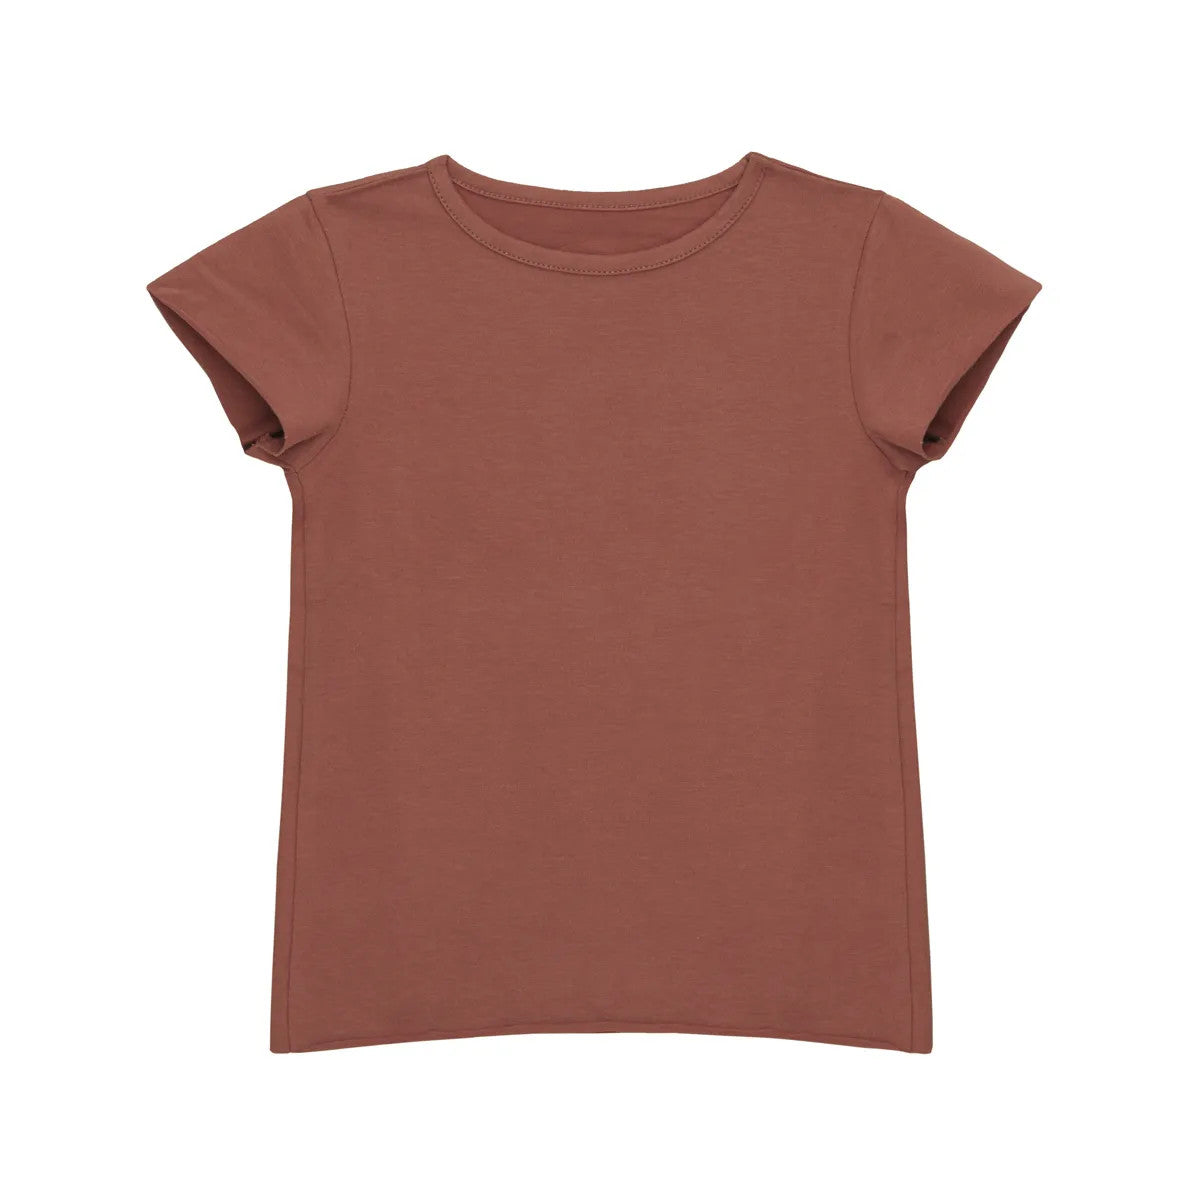 Little Hedonist unisex organic cotton t-shirt in Potters Clay